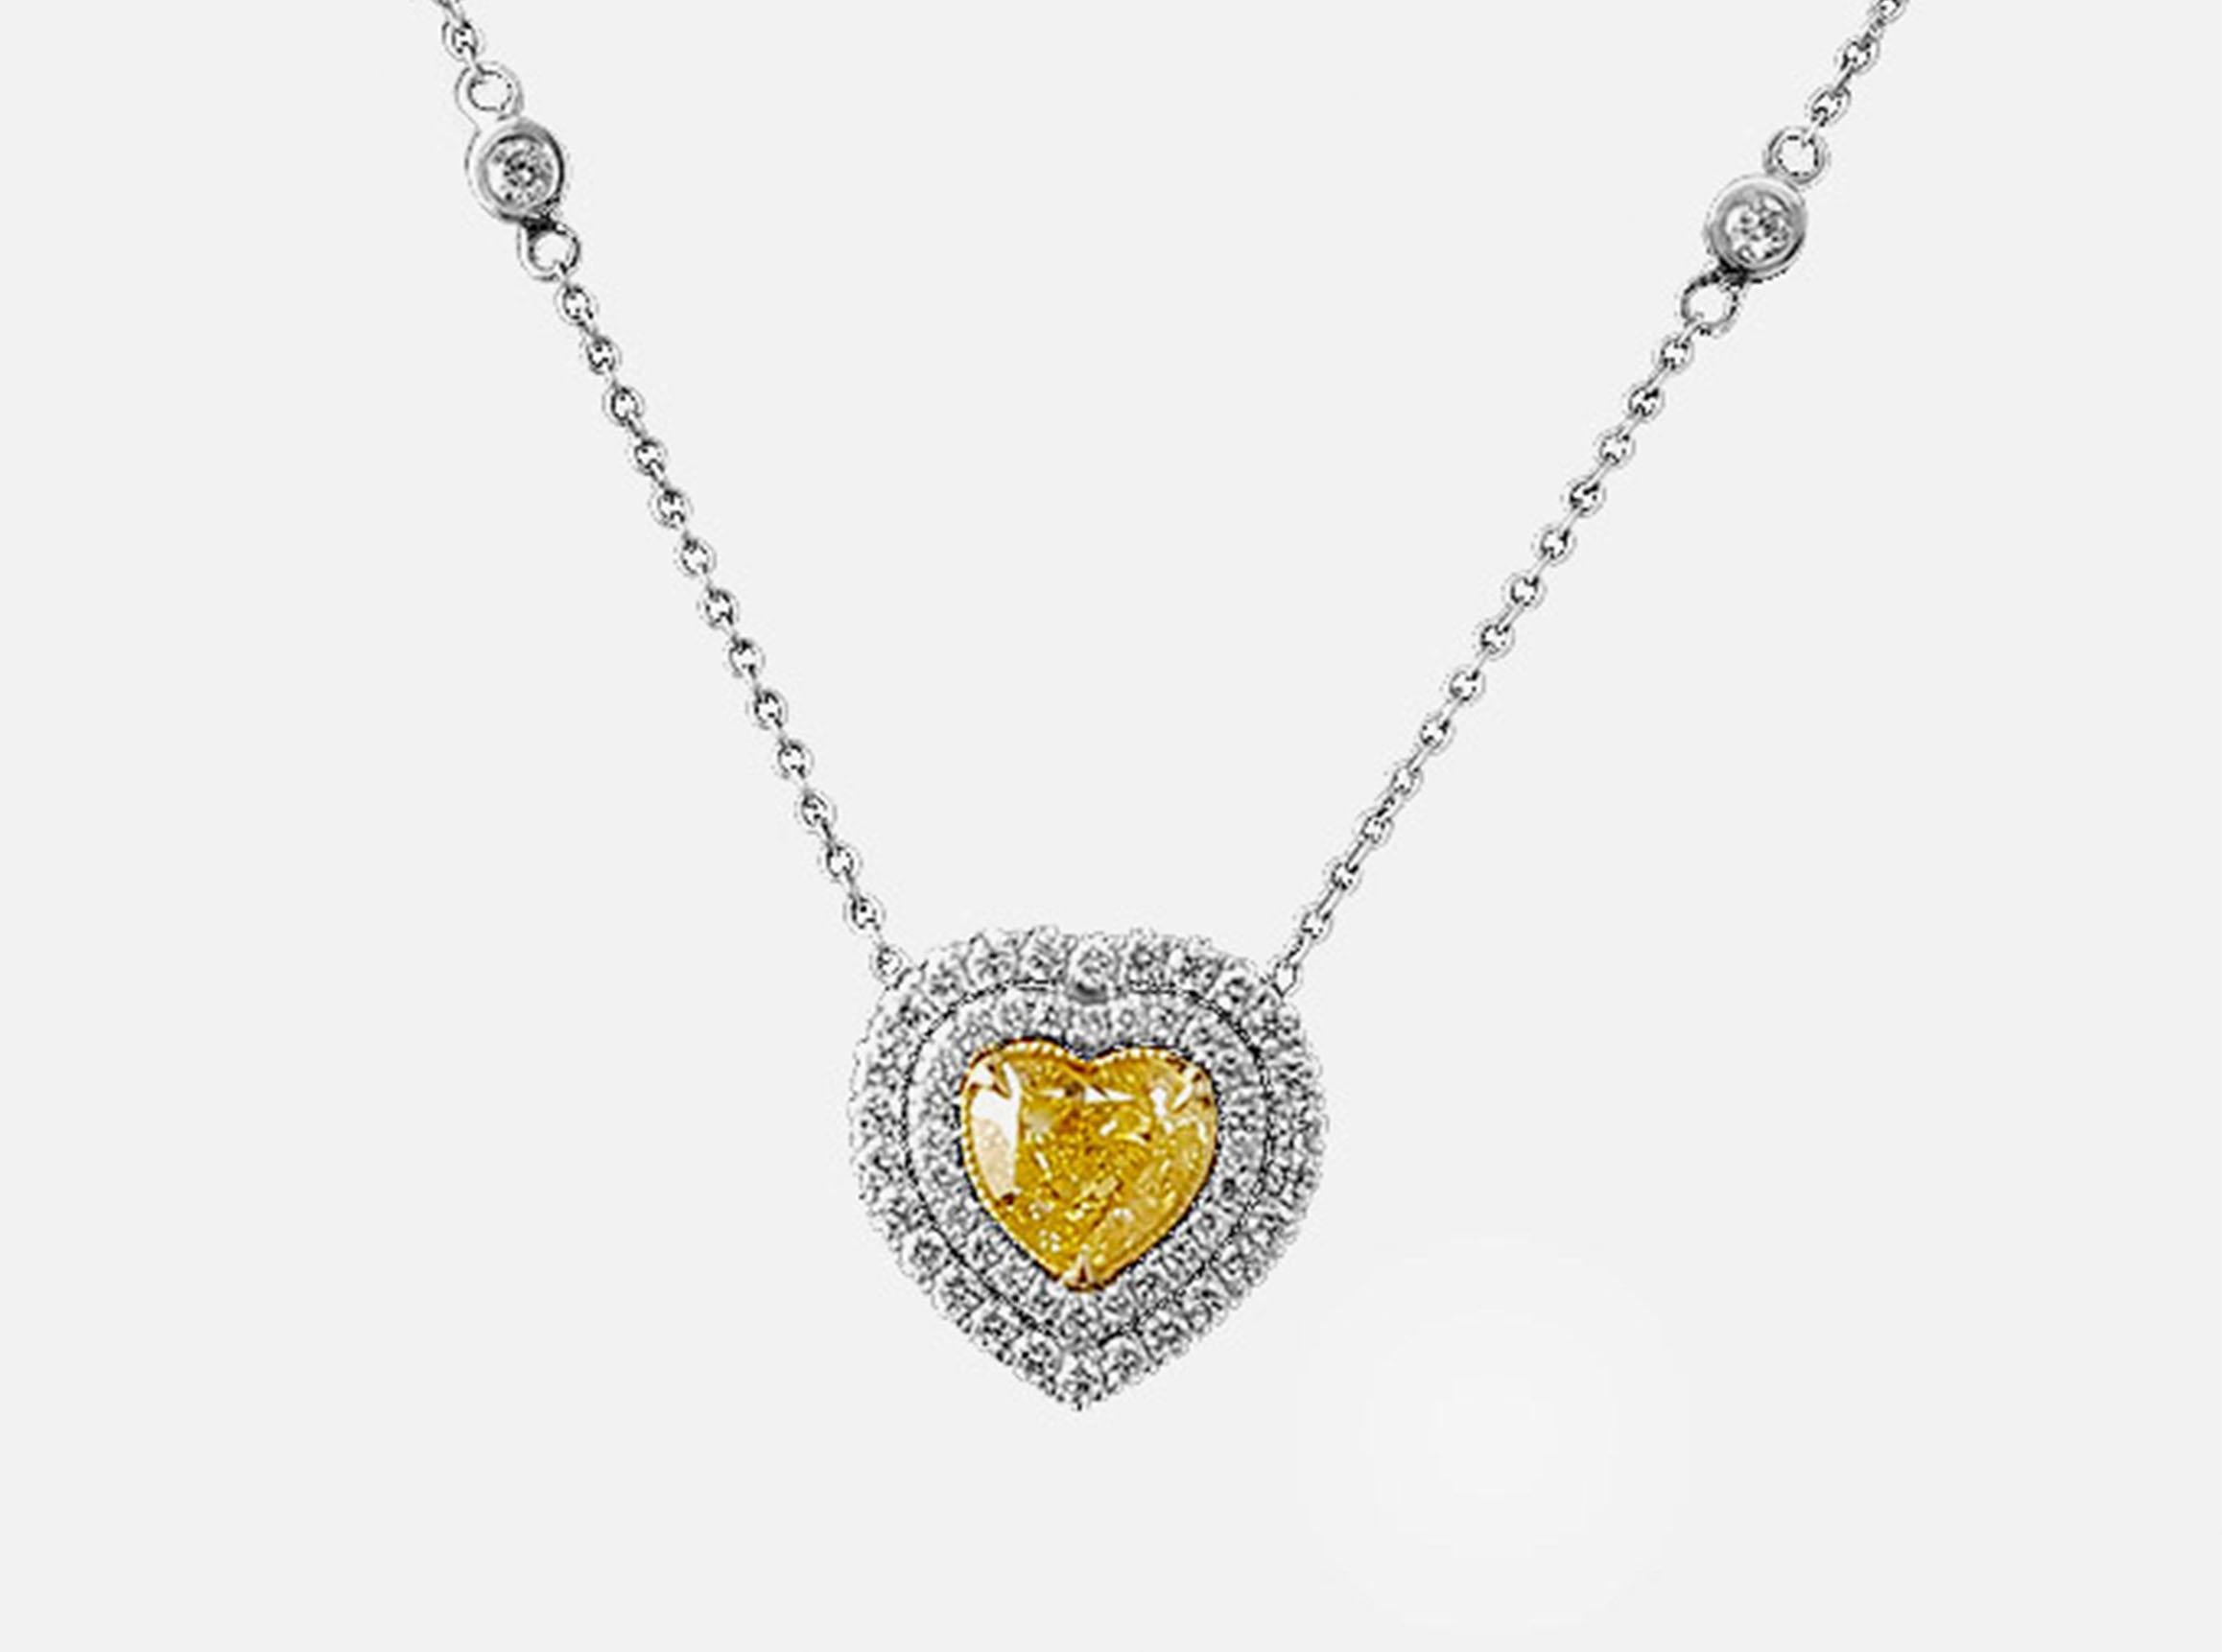 Contemporary 1.26 Carat Heart Cut, Fancy Yellow Diamond Halo Pendant Necklace, 18K Gold, GIA. For Sale